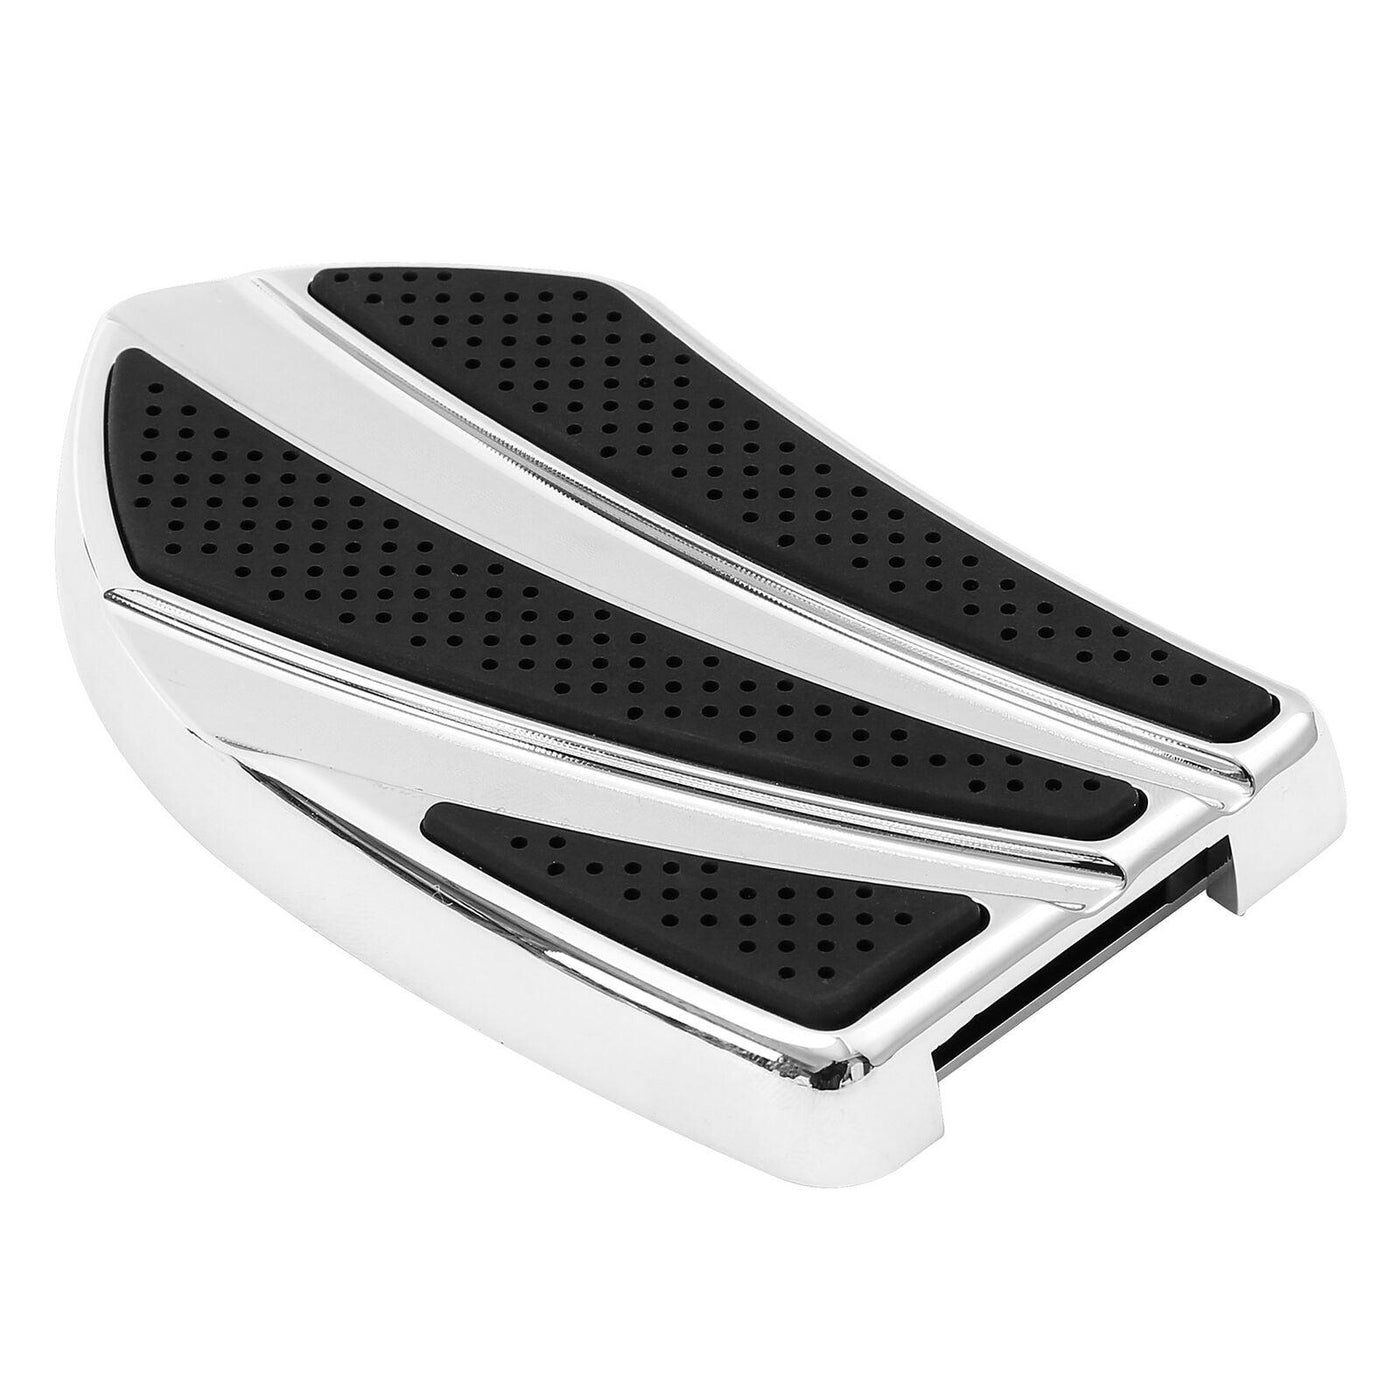 Large Brake Pedal Pad Fit For Harley Electra Glide 80-21 Softail Slim FLS 12-17 - Moto Life Products